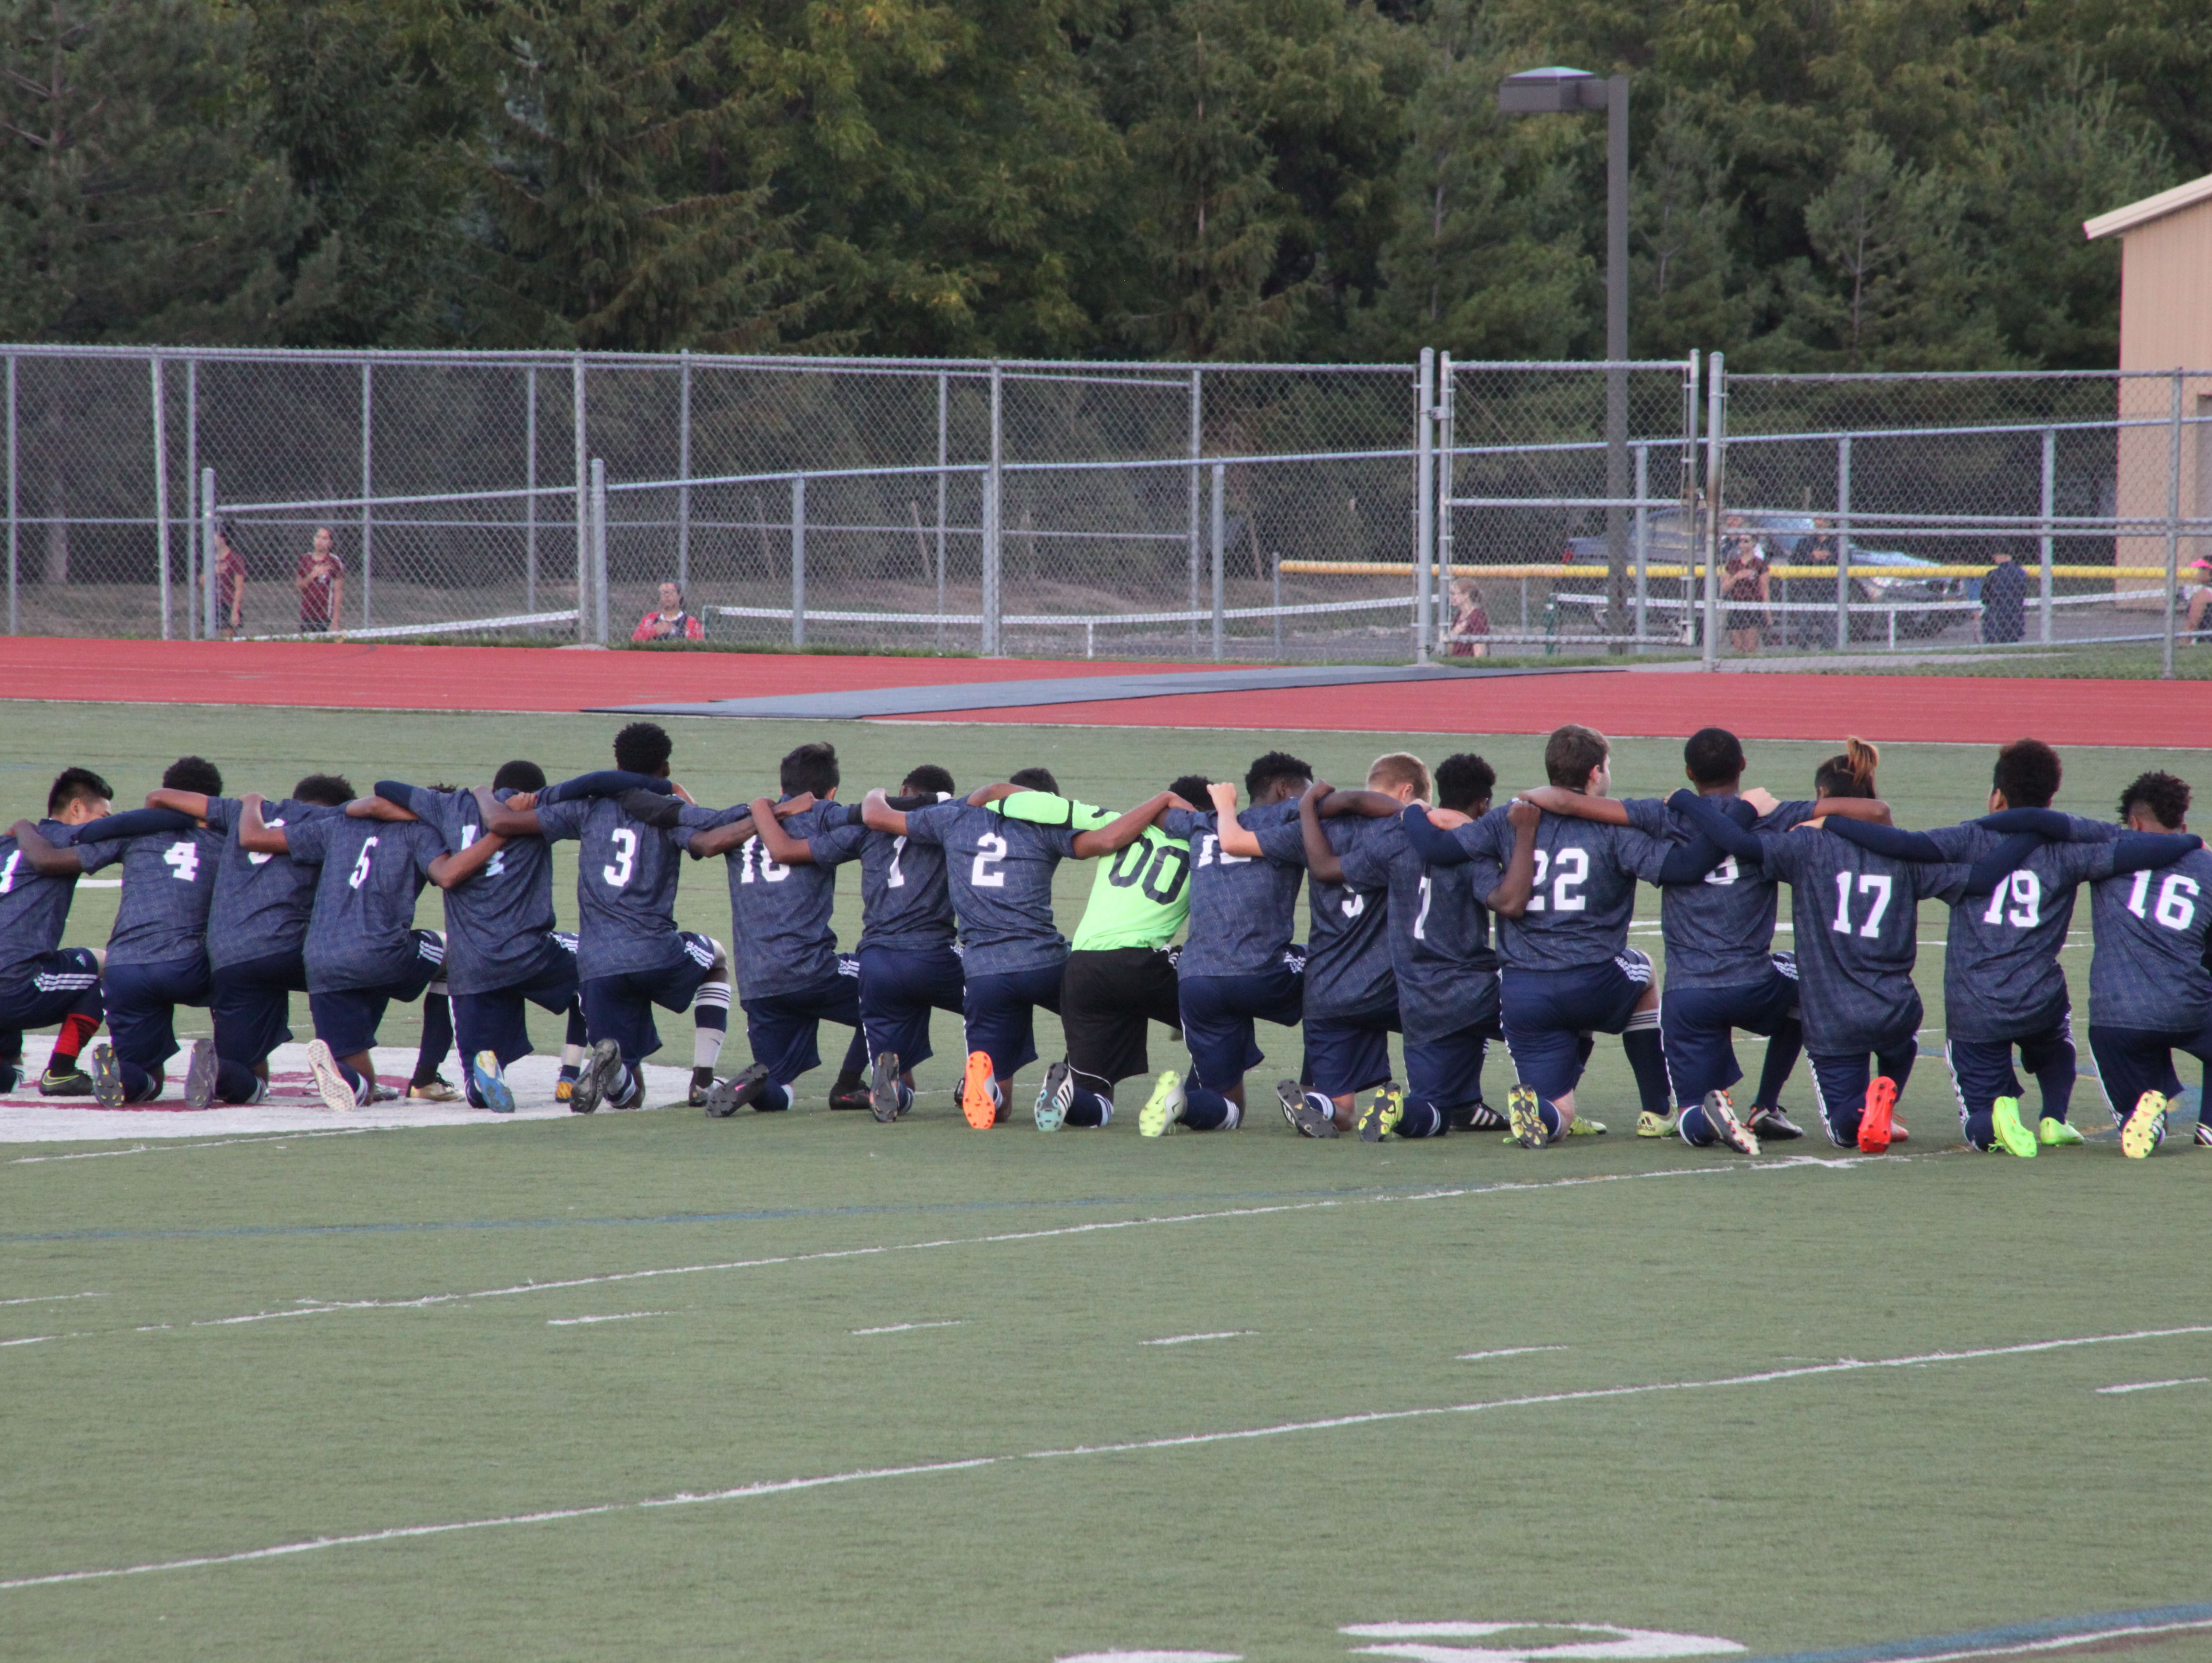 The entire World of Inquiry/School 58 boys soccer team knelt during the national anthem before Tuesday's 1-0 win at Aquinas Institute.